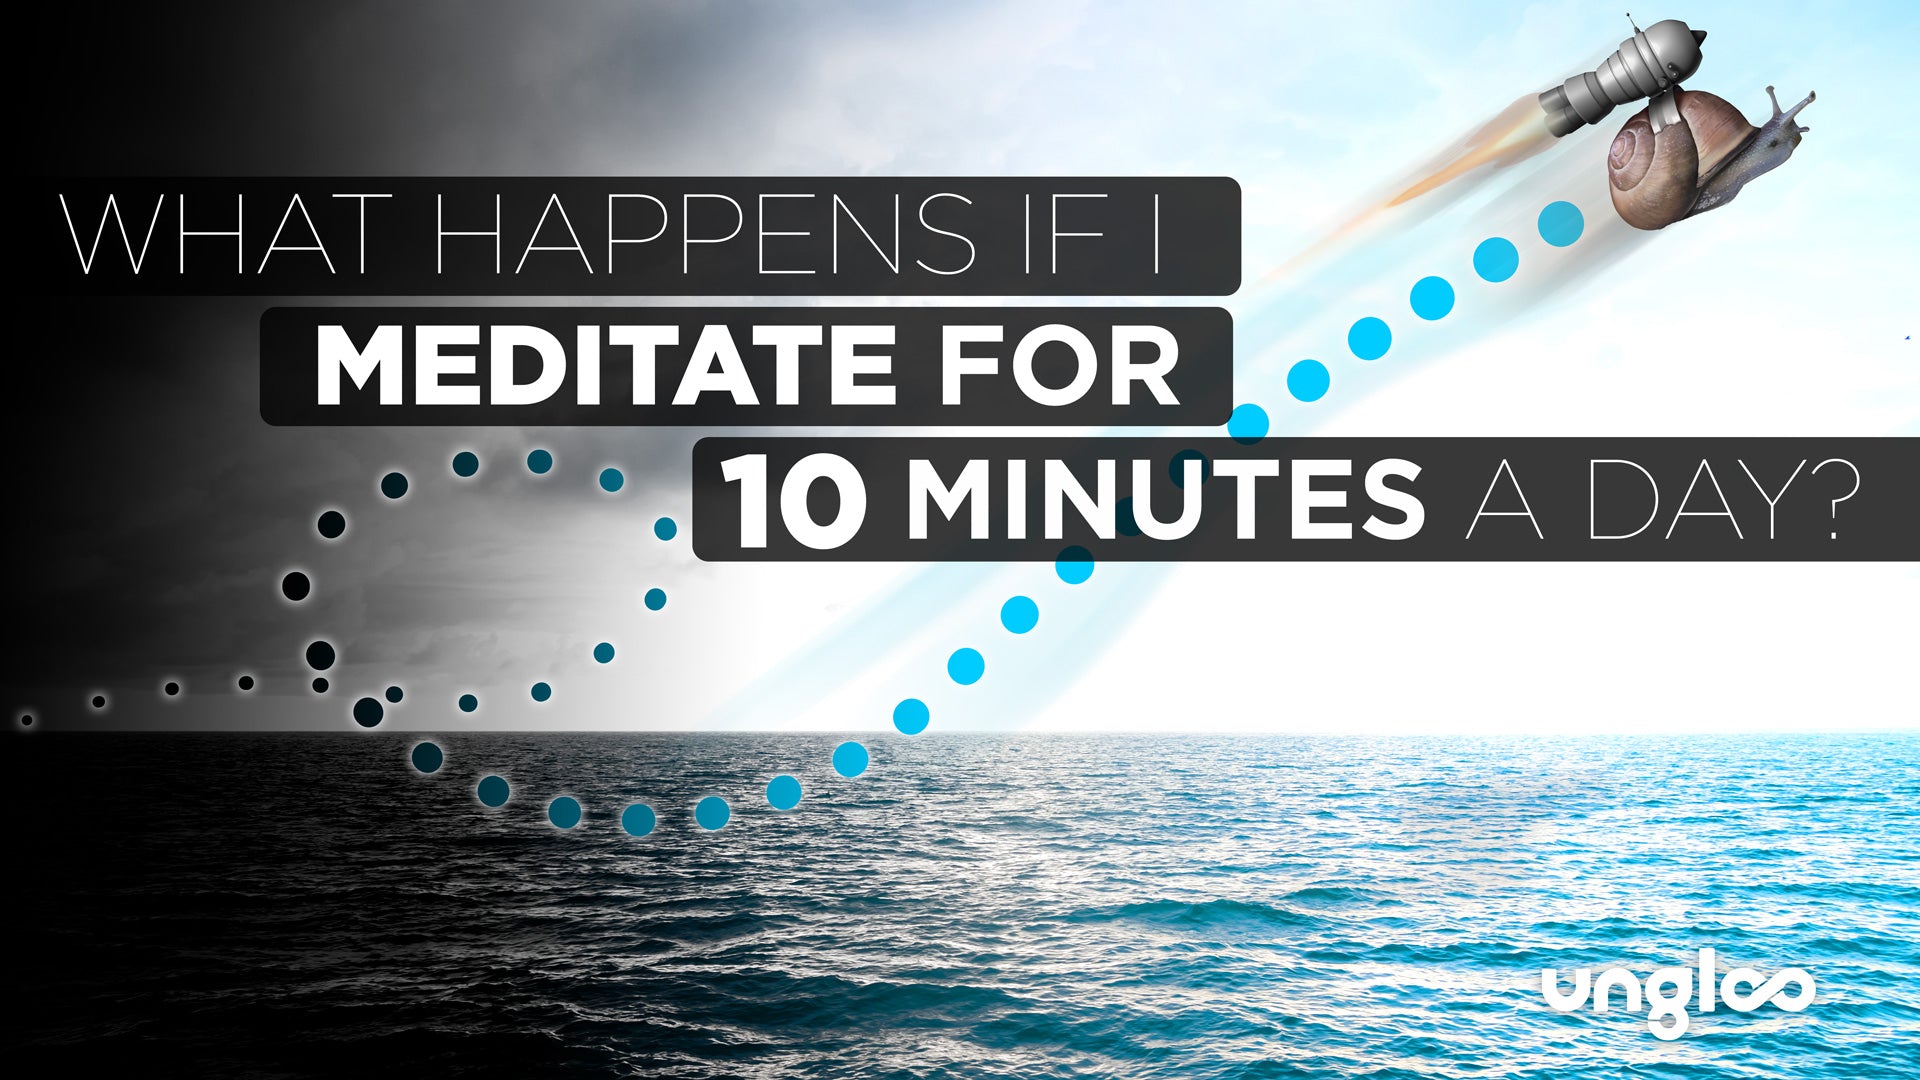 What Happens if I Meditate for 10 Minutes A Day